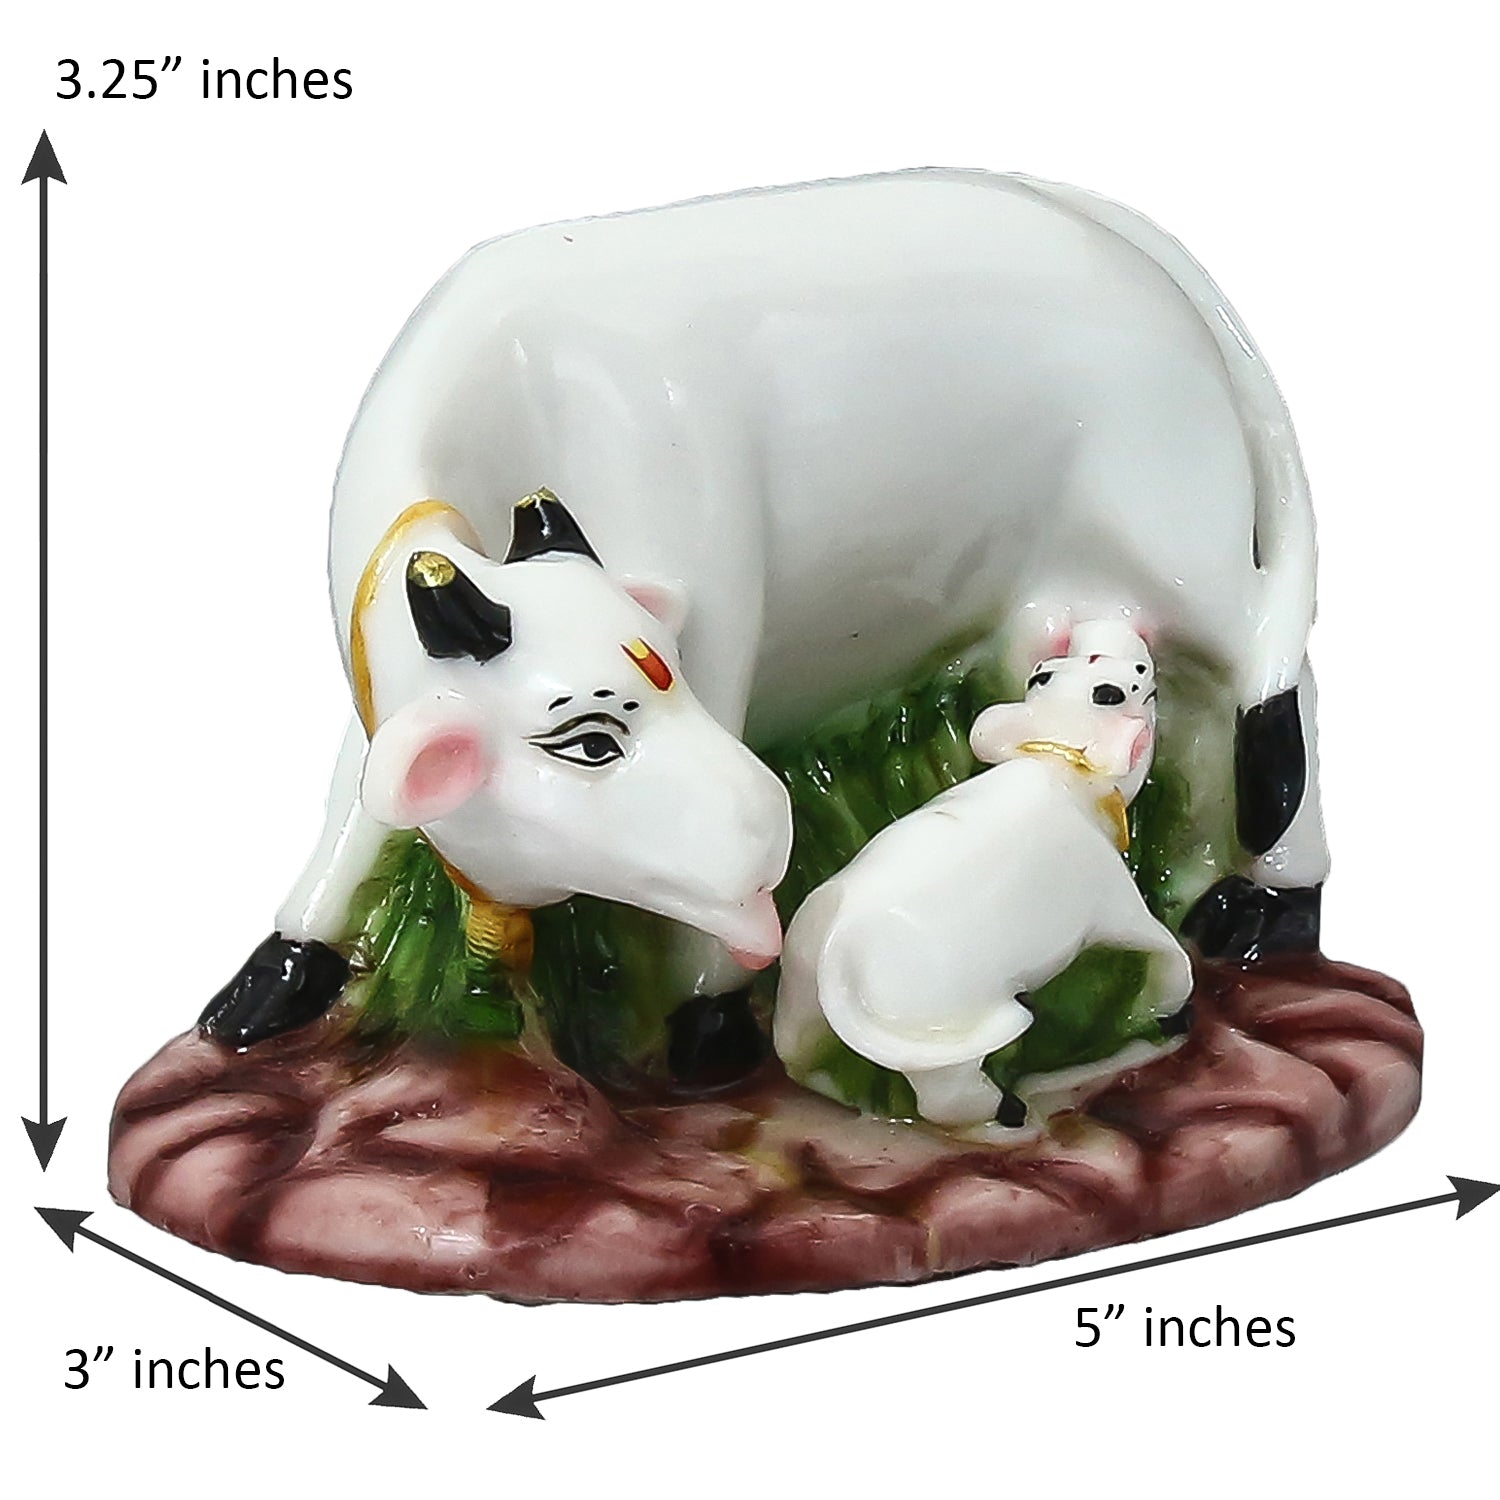 Polyresin White Cow and Calf Statue 2